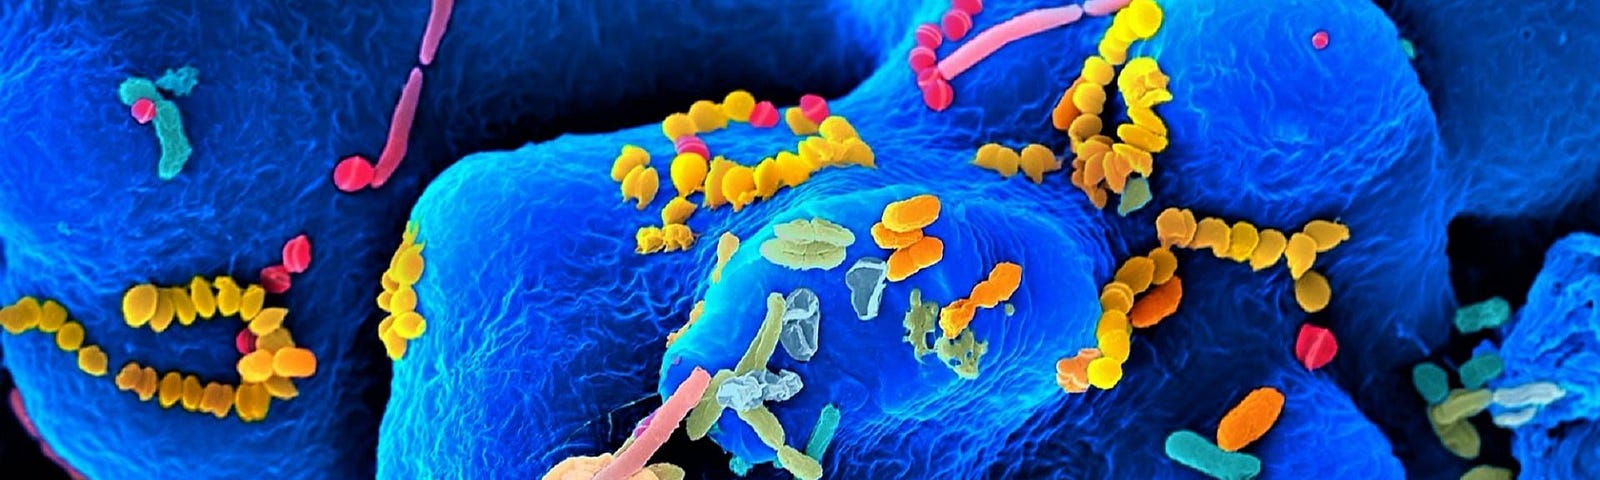 Image showing lots of different kinds of microscopic organisms